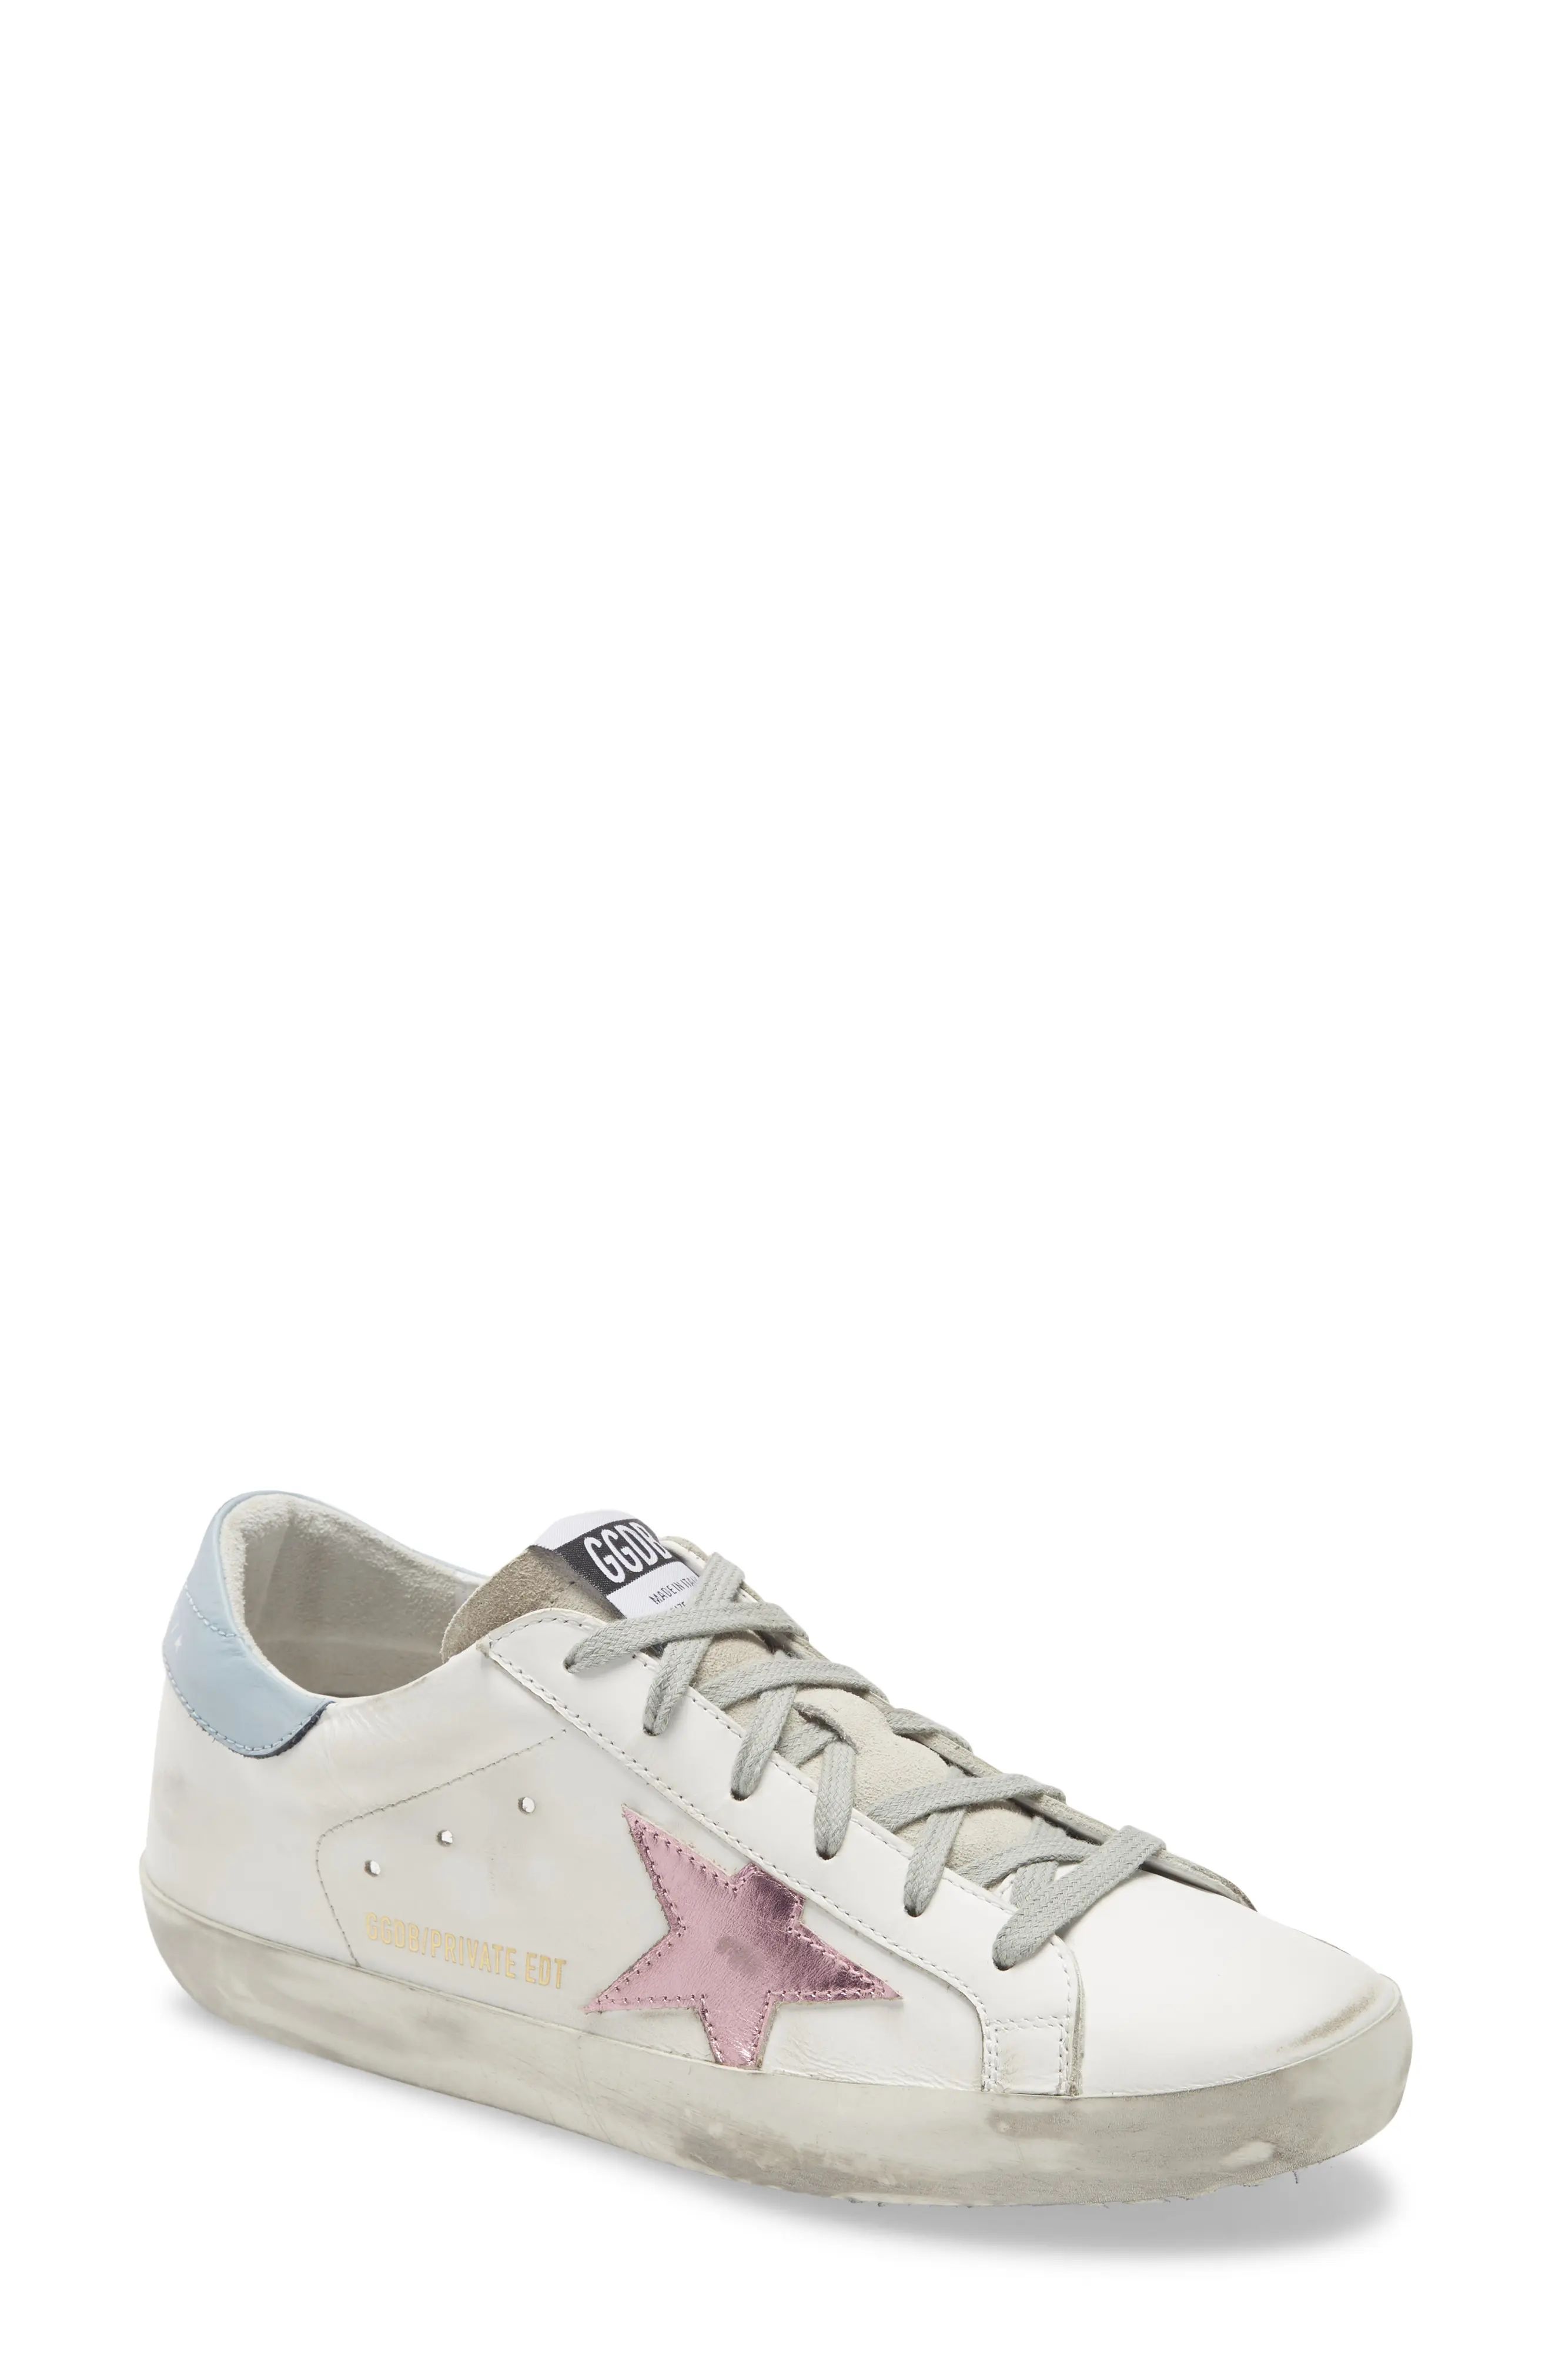 Golden Goose Super Star Low Top Sneaker, Size 9Us in White Leather at Nordstrom | Nordstrom